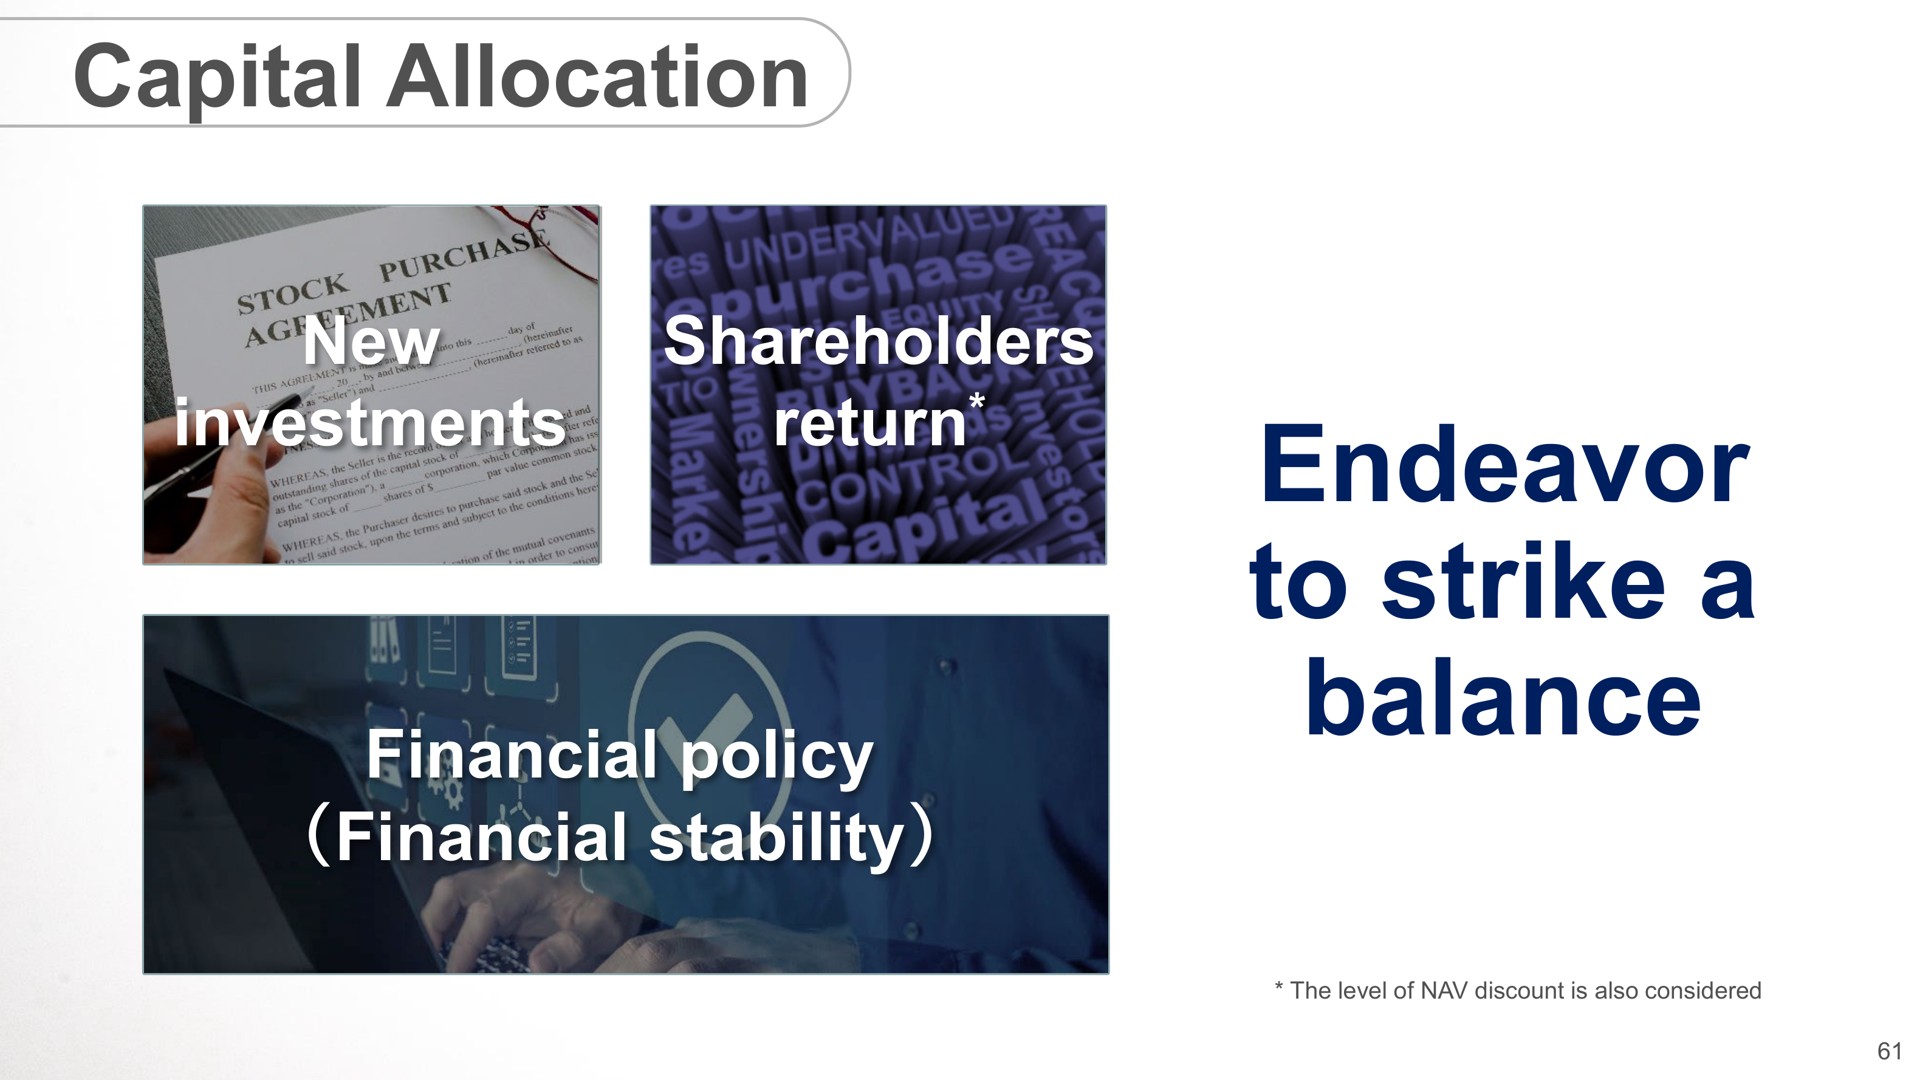 capital allocation new investments shareholders return financial policy financial stability endeavor to strike a balance | SoftBank